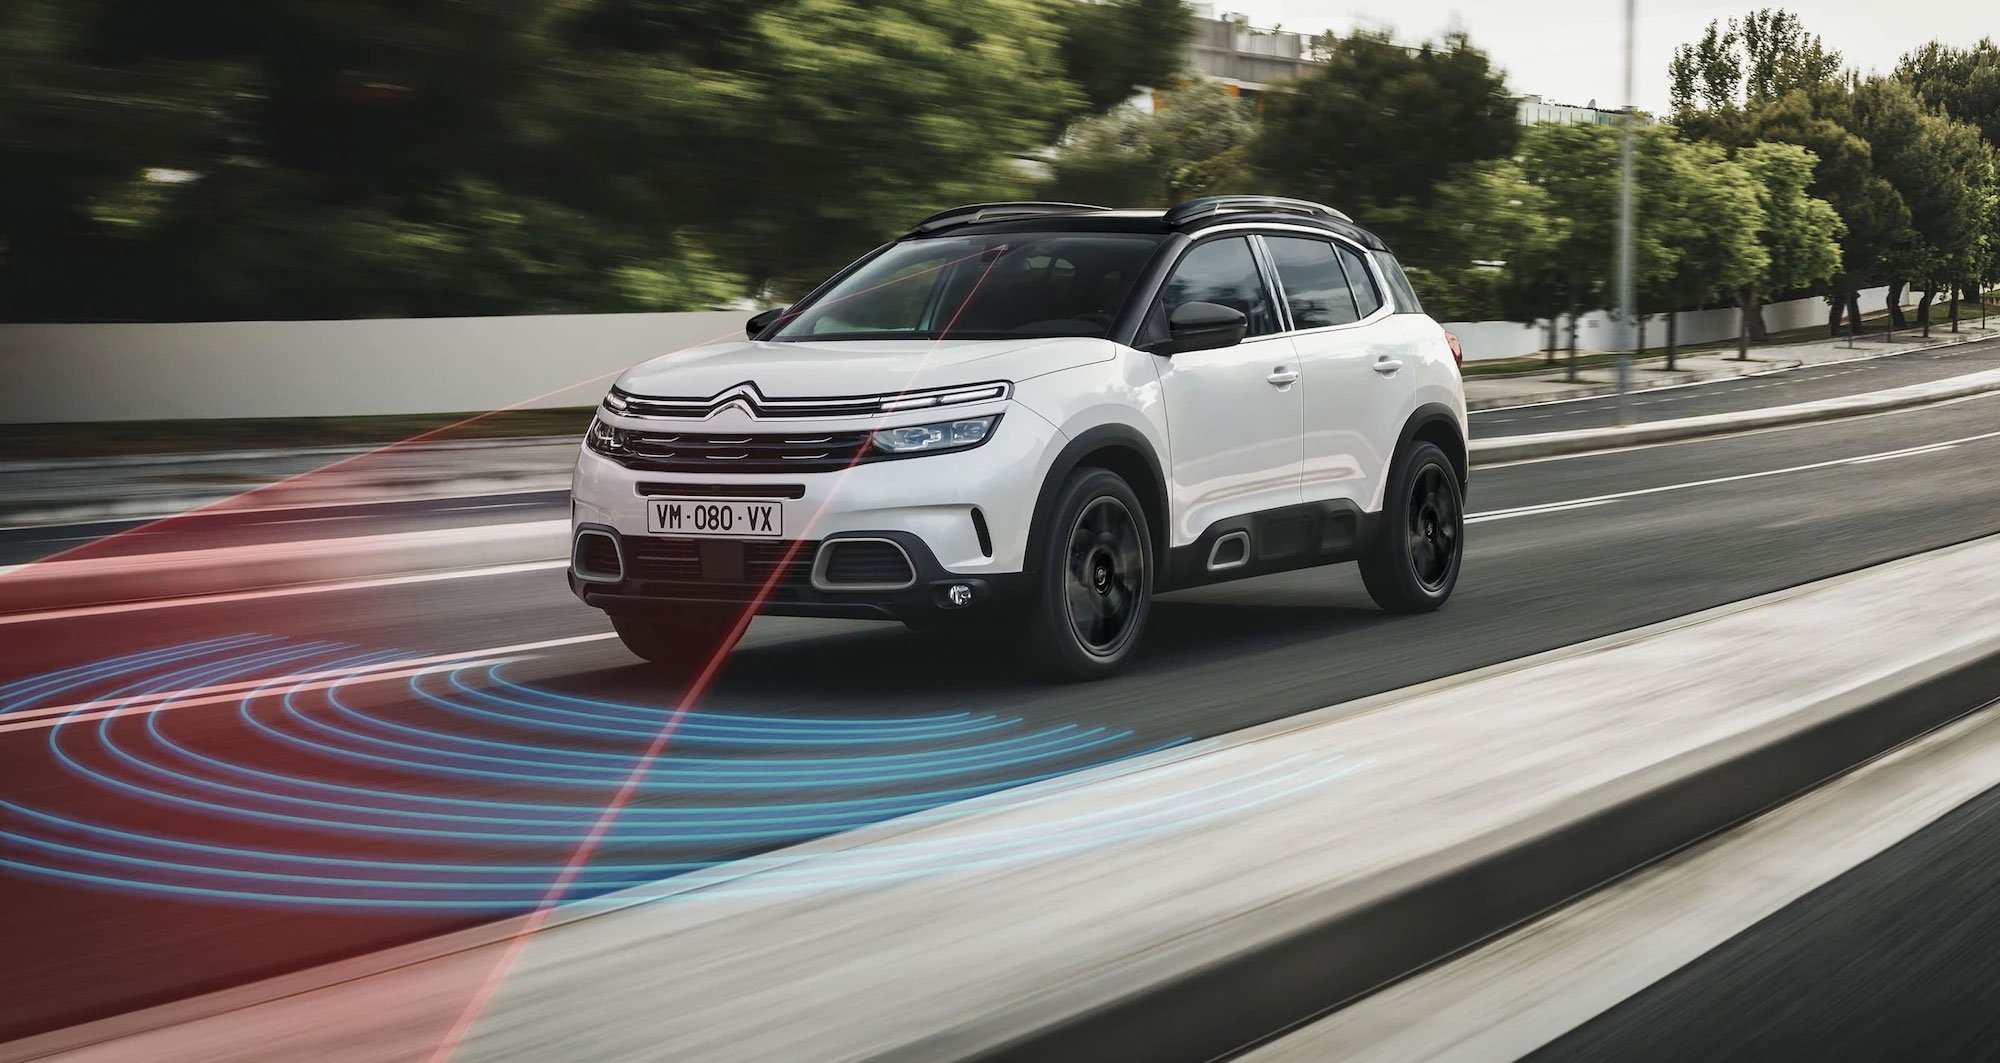 Citroën C5 Aircross SUV  Style, comfort and modularity